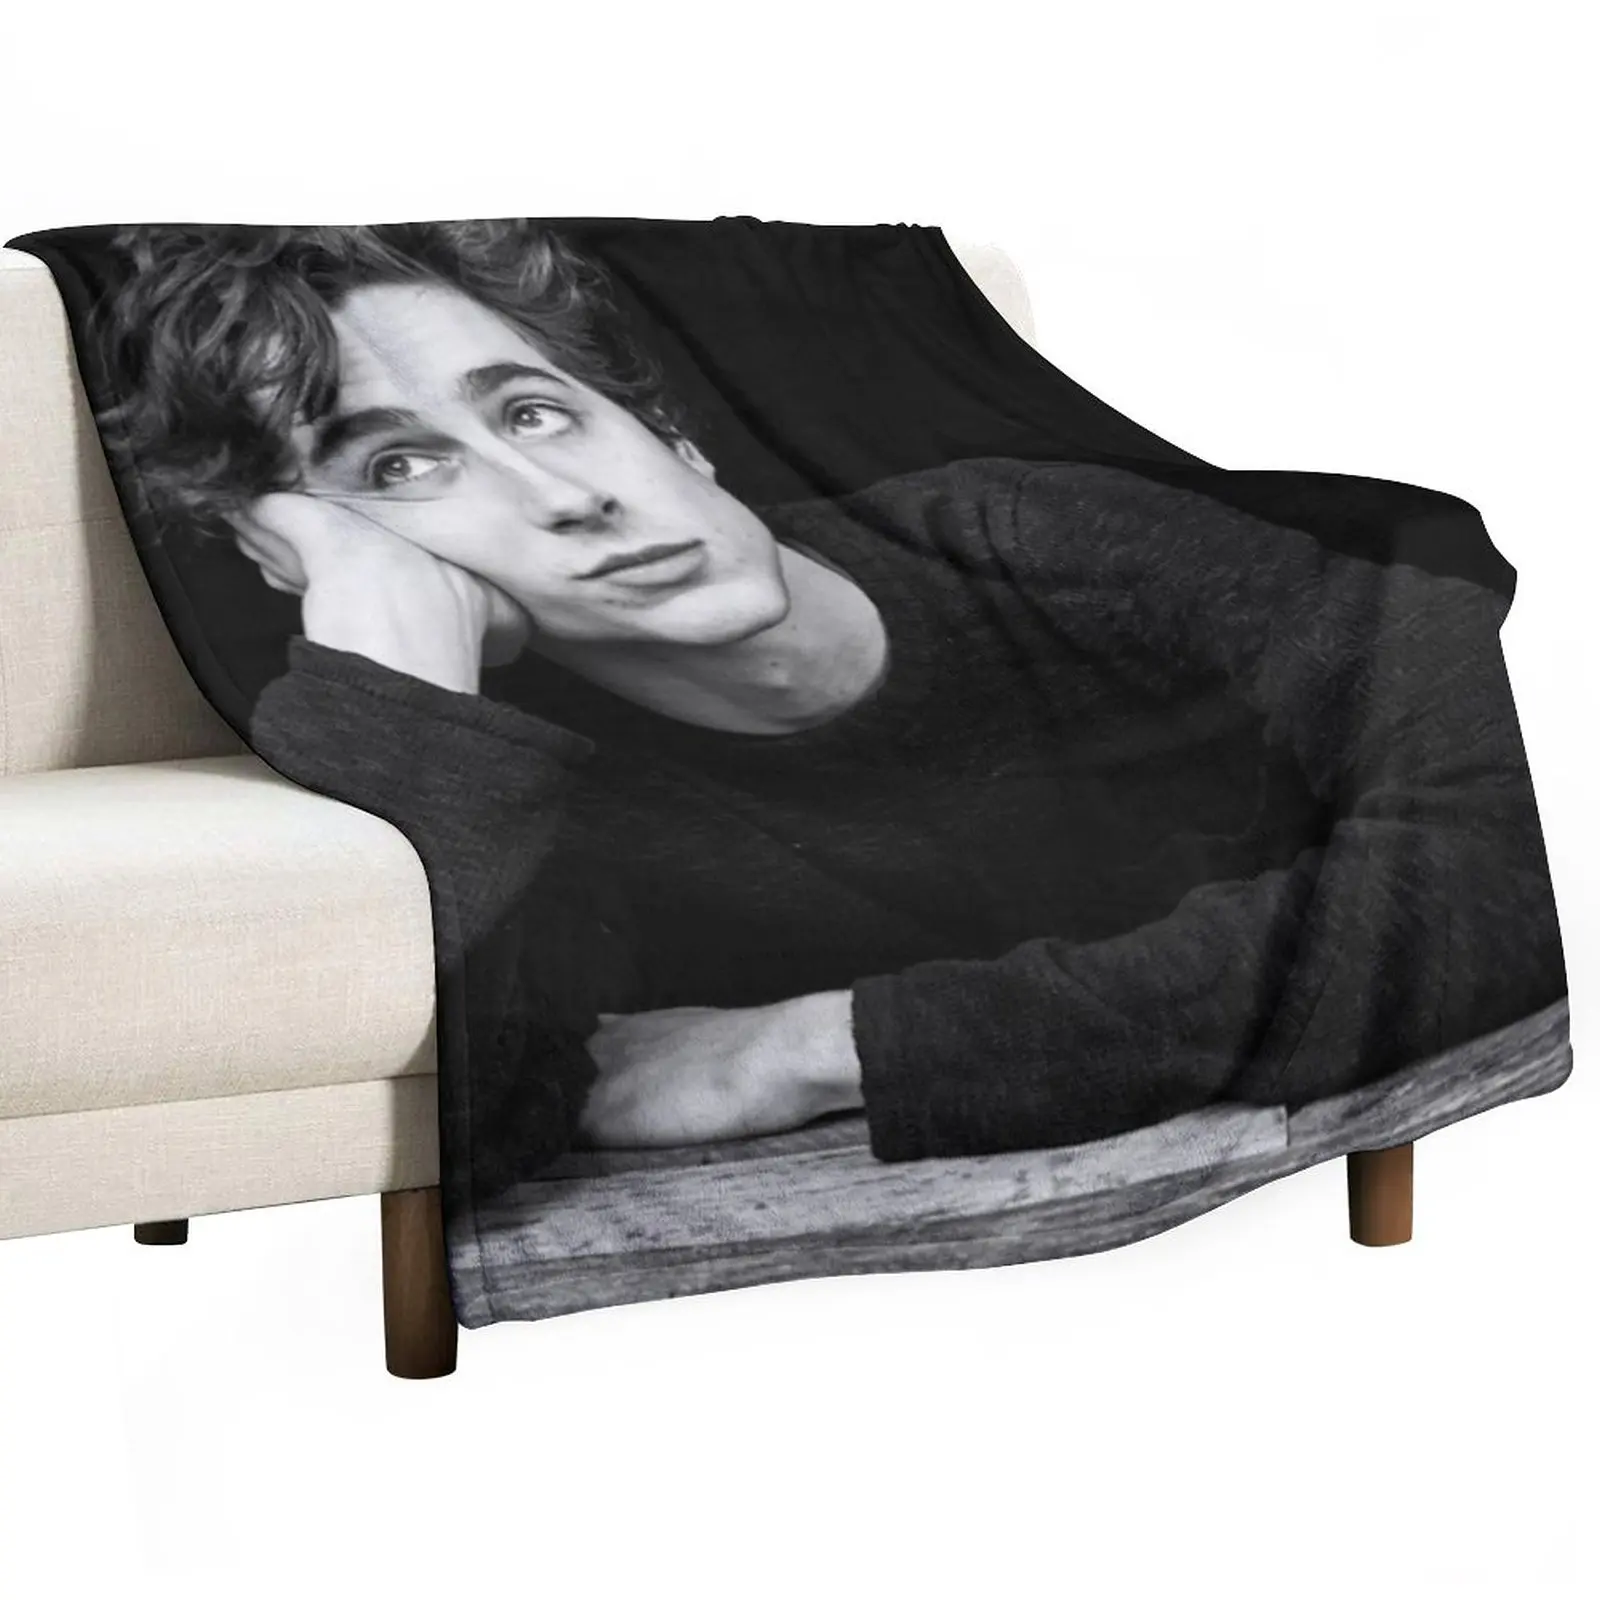 

Timothee Chalamet Throw Blanket Blankets For Baby Decorative Sofa Blankets Flannel Fabric Weighted Blanket